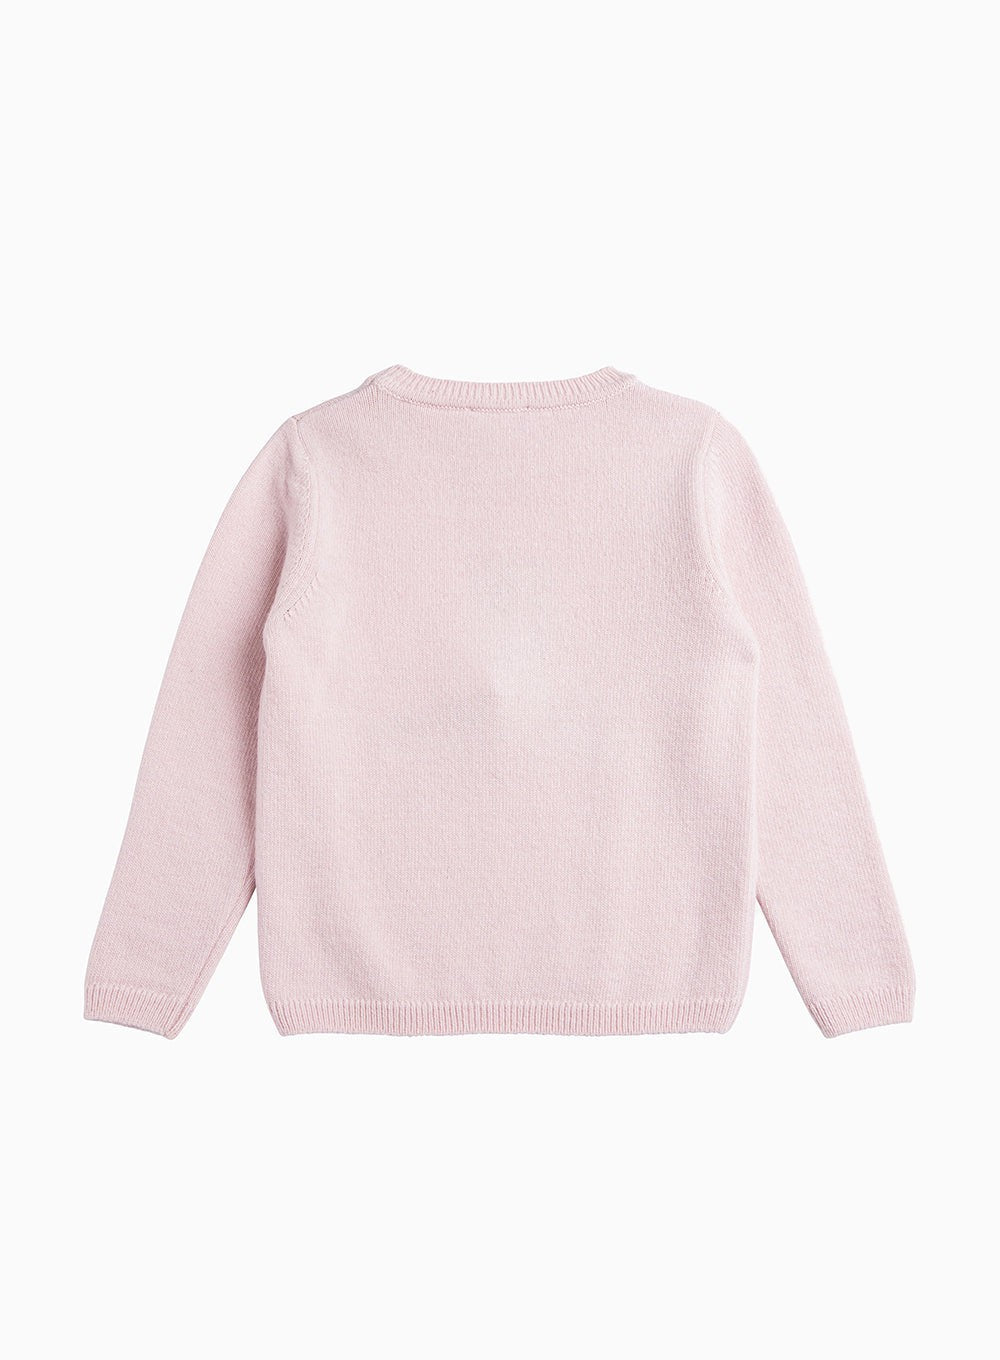 Confiture Girls Olivia Owl Sweater in Pink | Trotters London – Trotters ...